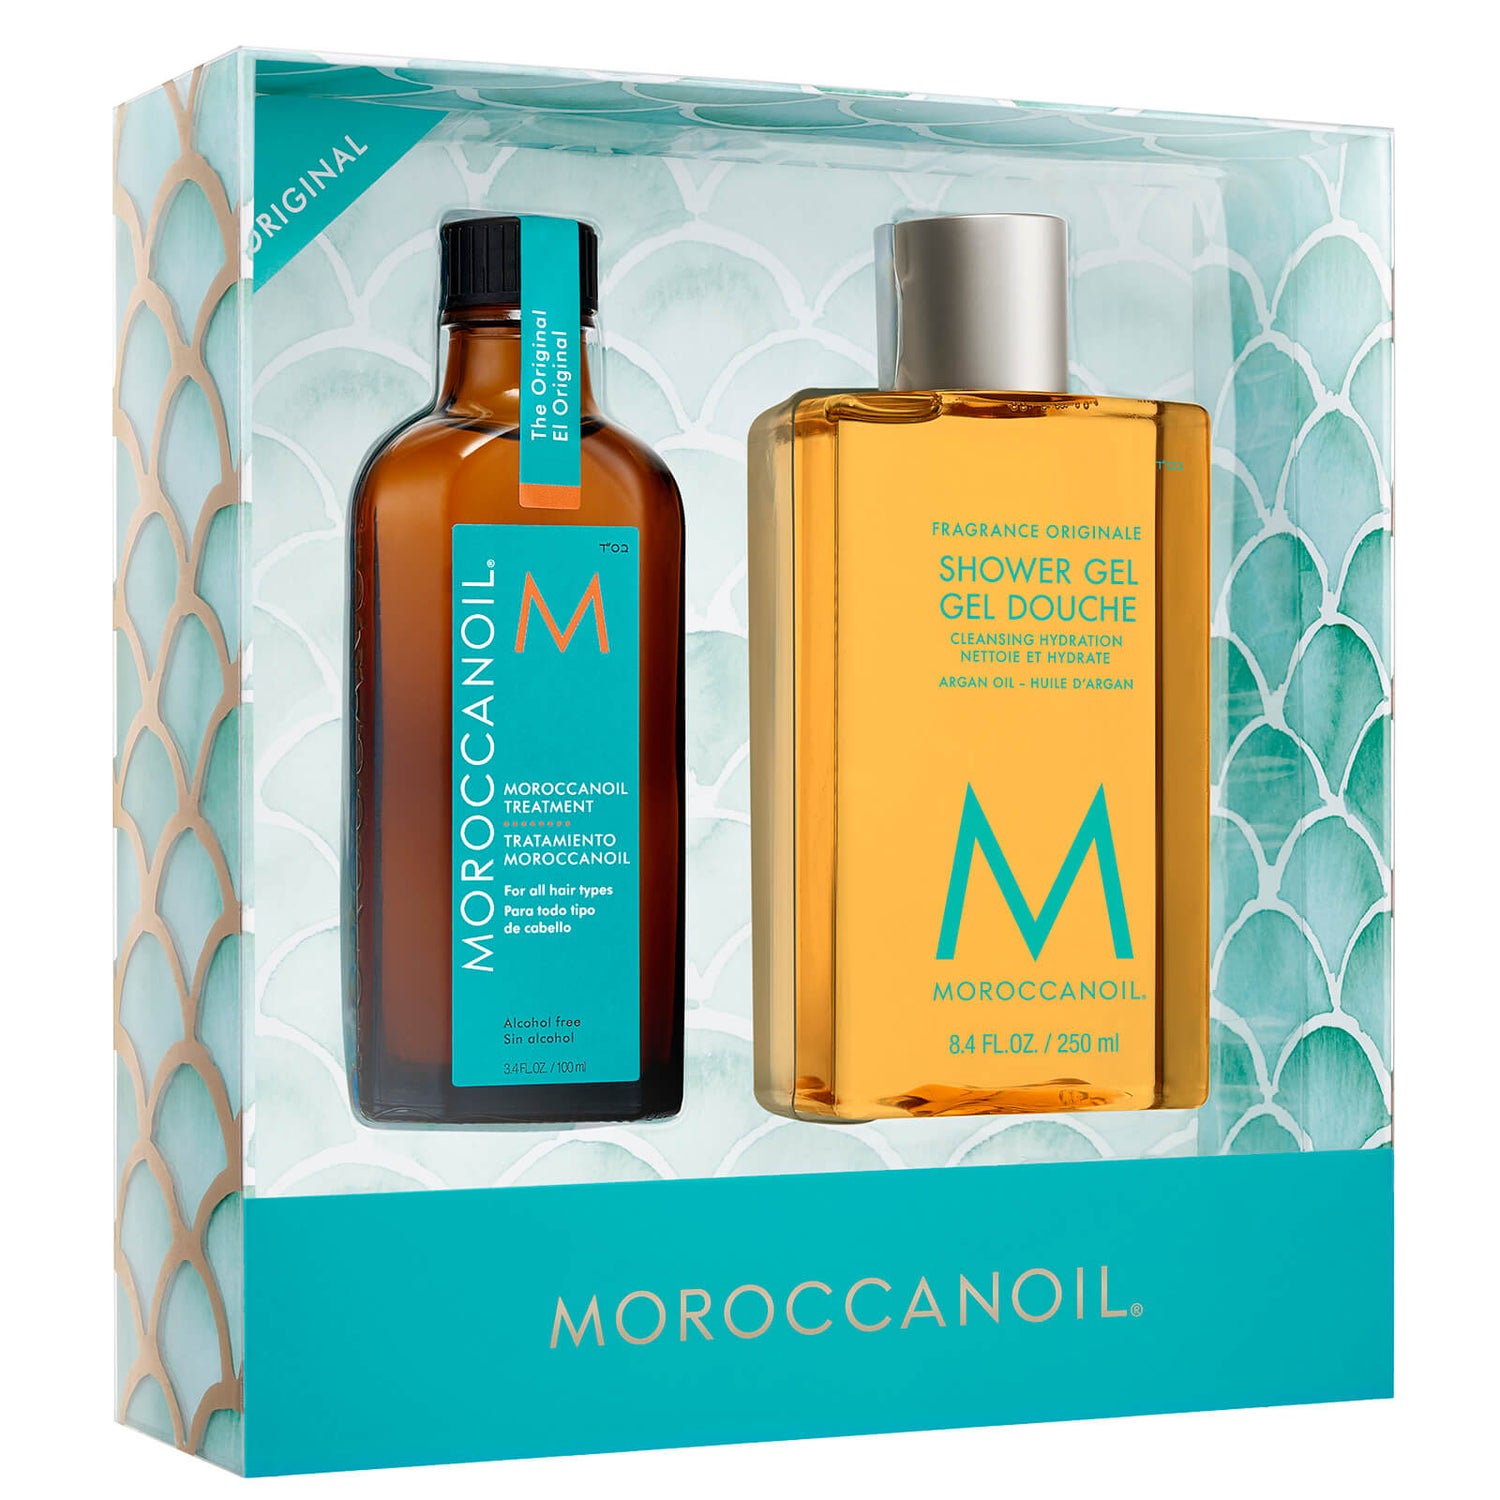 Moroccanoil Treatment and Shower Gel Gift Set (Worth £56.85)